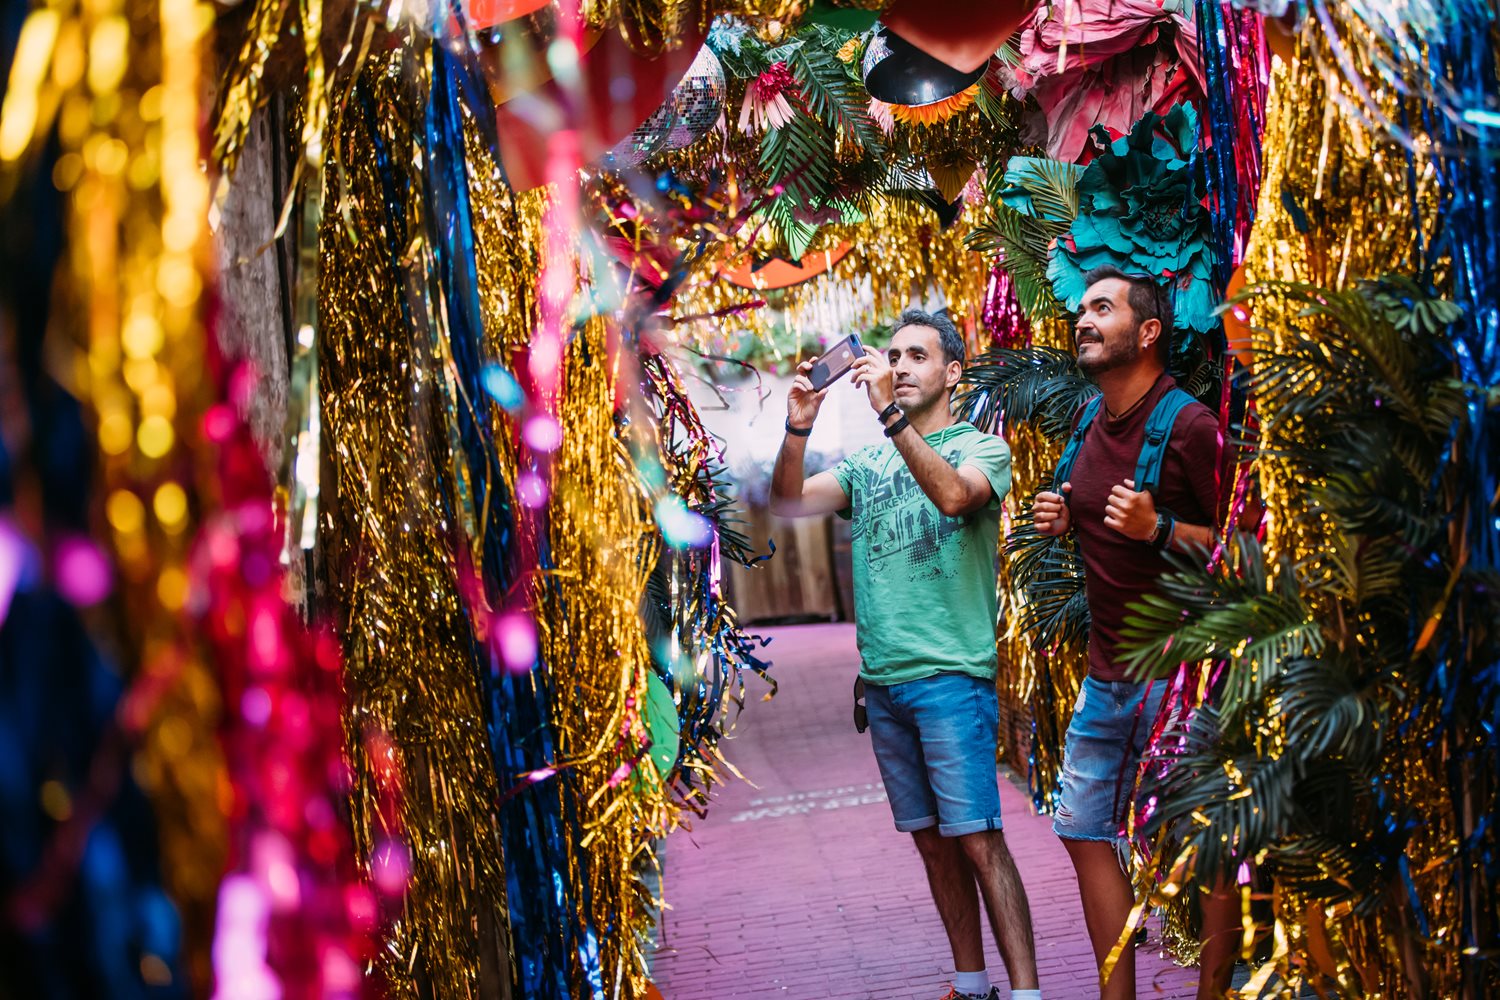 Two men taking photographs in an alleyway surrounded by colourful tinsel